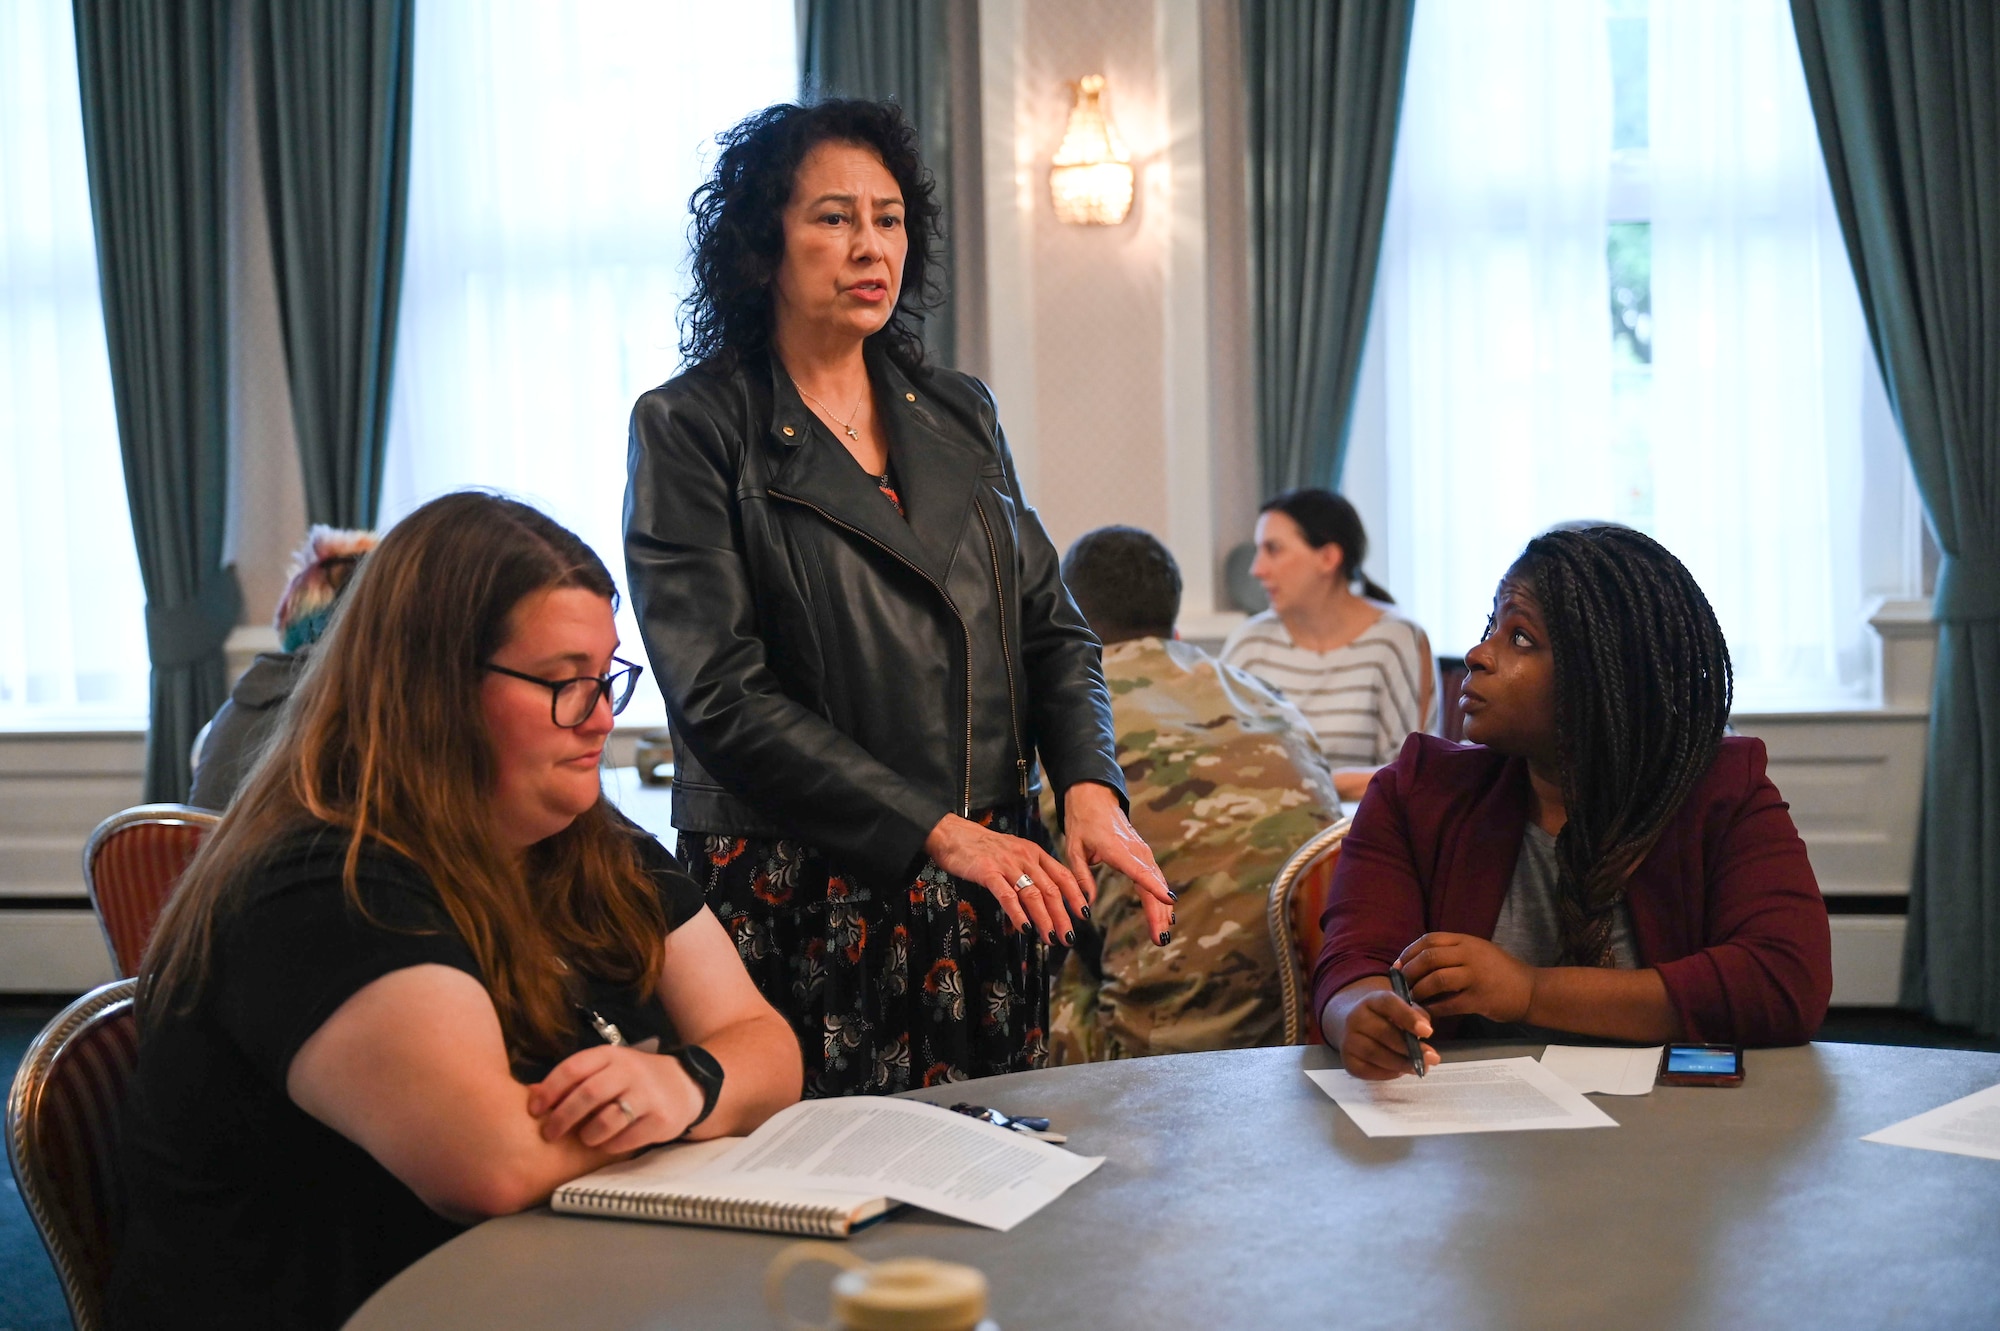 The groups discussed stories and incidents of military sexual assault survivors.